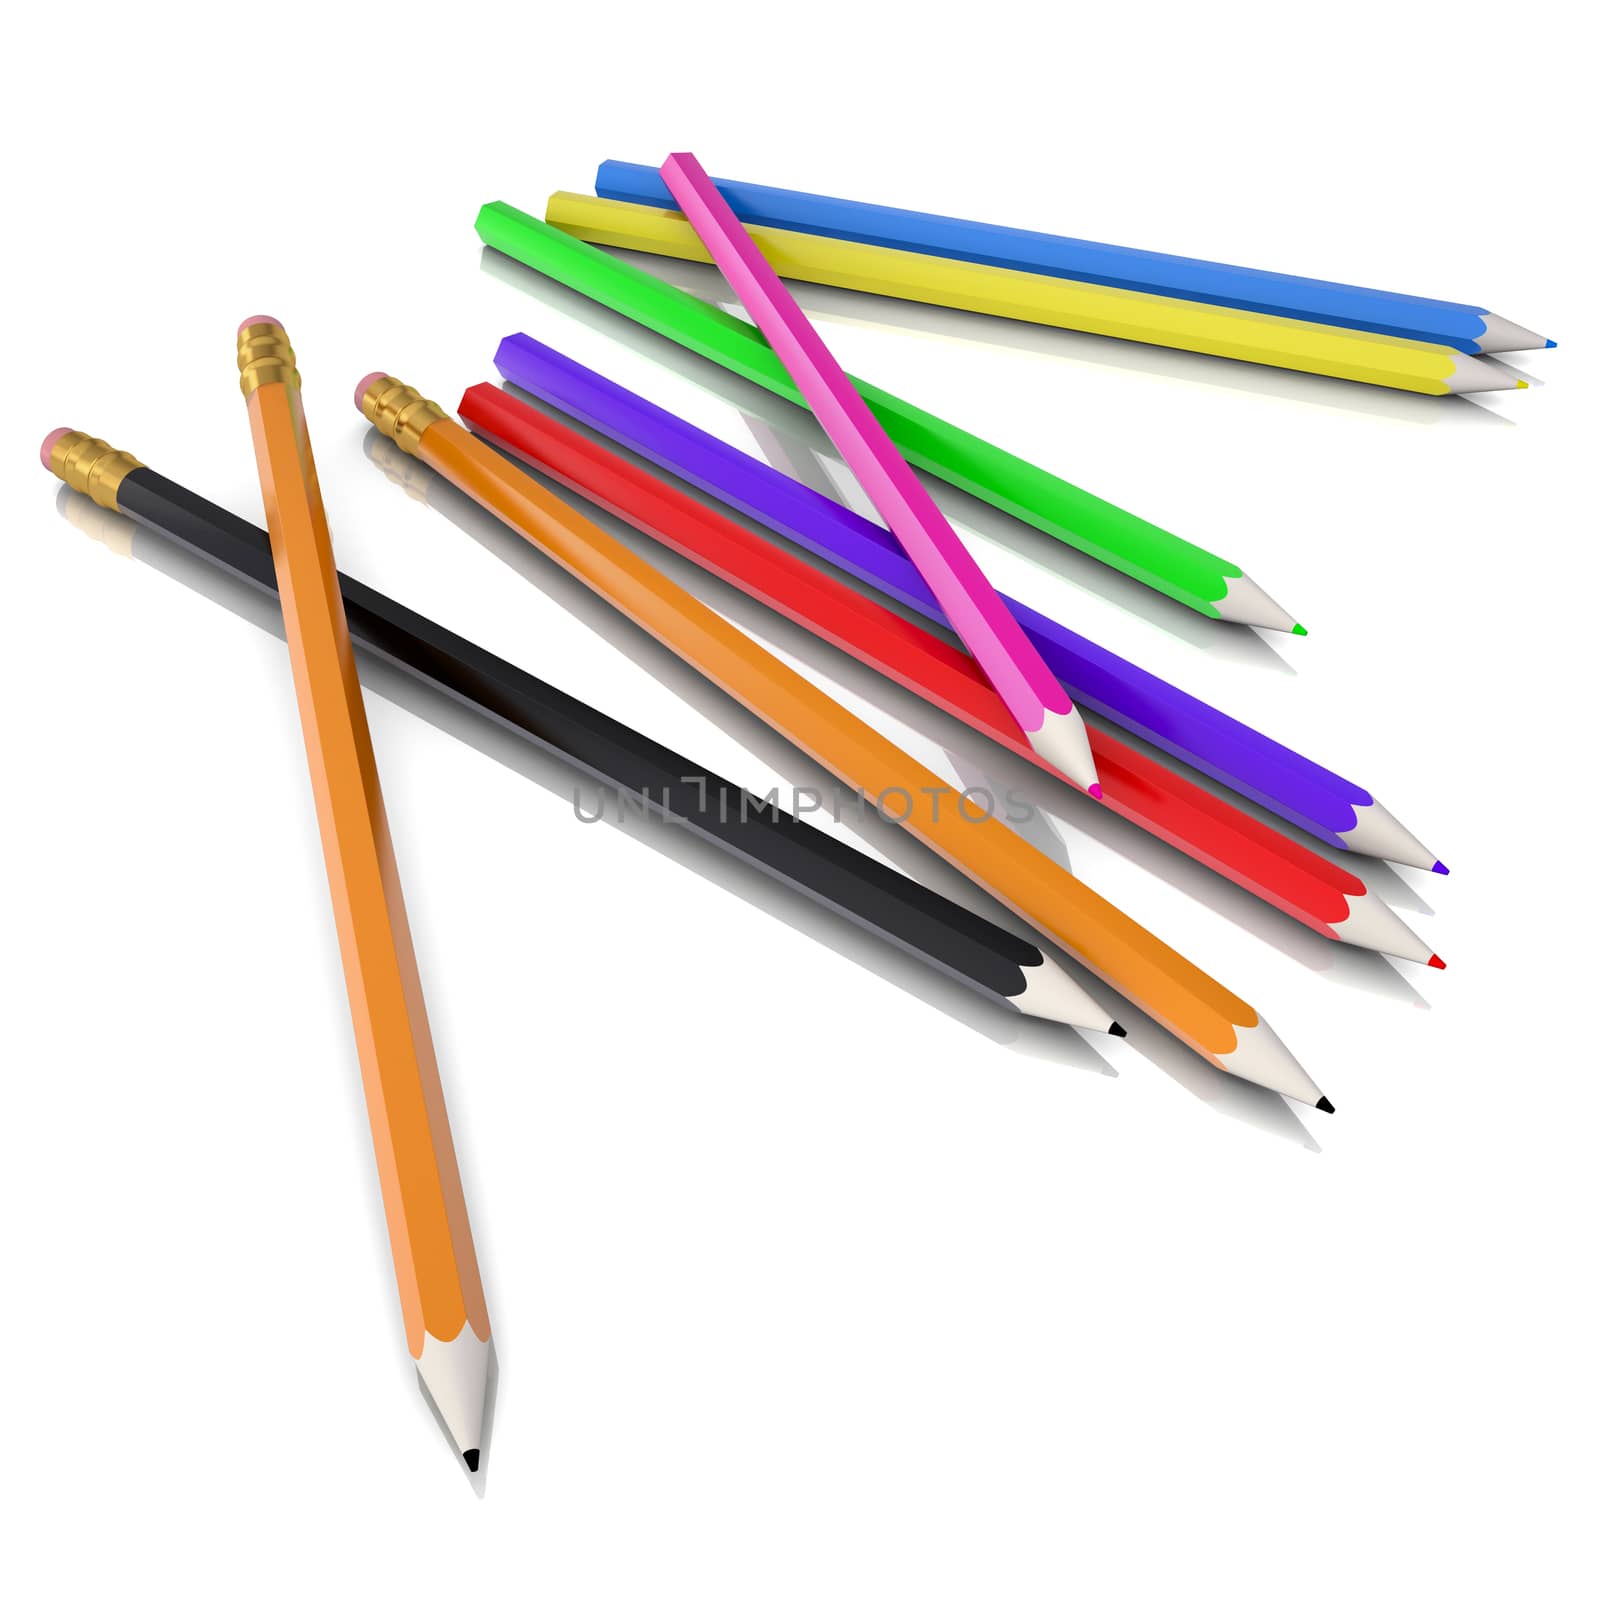 Colored pencils. Isolated render on a white background